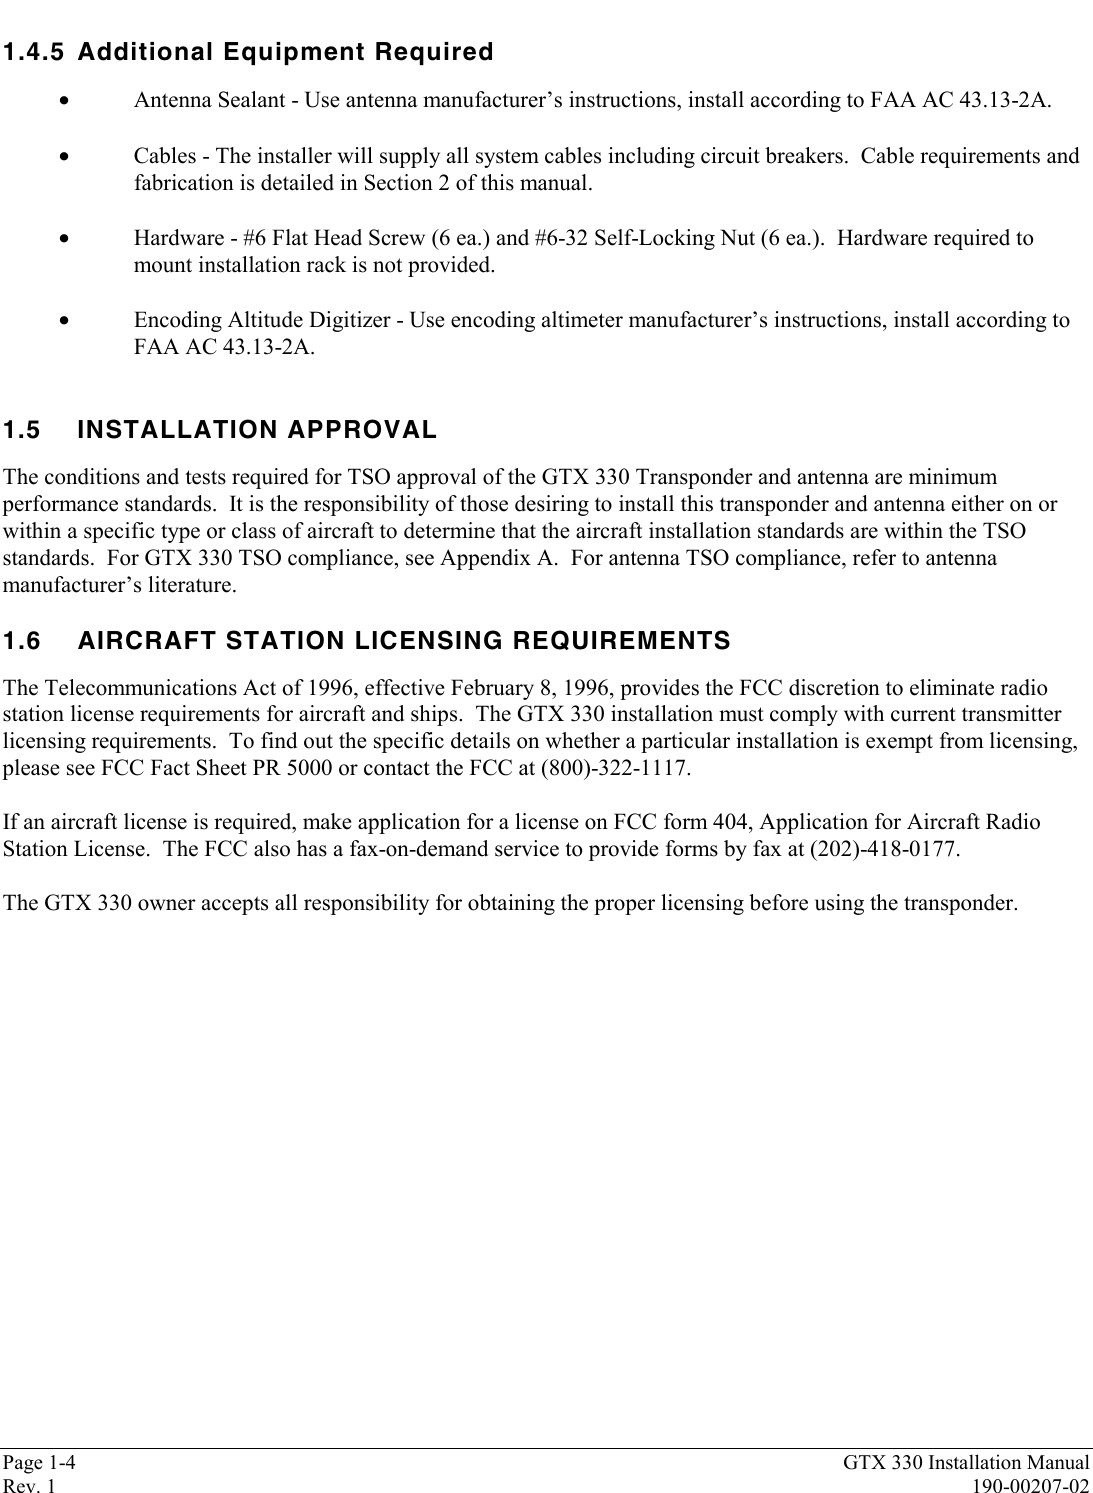 Page 1-4 GTX 330 Installation ManualRev. 1 190-00207-021.4.5 Additional Equipment Required•Antenna Sealant - Use antenna manufacturer’s instructions, install according to FAA AC 43.13-2A.•Cables - The installer will supply all system cables including circuit breakers.  Cable requirements andfabrication is detailed in Section 2 of this manual.•Hardware - #6 Flat Head Screw (6 ea.) and #6-32 Self-Locking Nut (6 ea.).  Hardware required tomount installation rack is not provided.•Encoding Altitude Digitizer - Use encoding altimeter manufacturer’s instructions, install according toFAA AC 43.13-2A.1.5 INSTALLATION APPROVALThe conditions and tests required for TSO approval of the GTX 330 Transponder and antenna are minimumperformance standards.  It is the responsibility of those desiring to install this transponder and antenna either on orwithin a specific type or class of aircraft to determine that the aircraft installation standards are within the TSOstandards.  For GTX 330 TSO compliance, see Appendix A.  For antenna TSO compliance, refer to antennamanufacturer’s literature.1.6 AIRCRAFT STATION LICENSING REQUIREMENTSThe Telecommunications Act of 1996, effective February 8, 1996, provides the FCC discretion to eliminate radiostation license requirements for aircraft and ships.  The GTX 330 installation must comply with current transmitterlicensing requirements.  To find out the specific details on whether a particular installation is exempt from licensing,please see FCC Fact Sheet PR 5000 or contact the FCC at (800)-322-1117.If an aircraft license is required, make application for a license on FCC form 404, Application for Aircraft RadioStation License.  The FCC also has a fax-on-demand service to provide forms by fax at (202)-418-0177.The GTX 330 owner accepts all responsibility for obtaining the proper licensing before using the transponder.